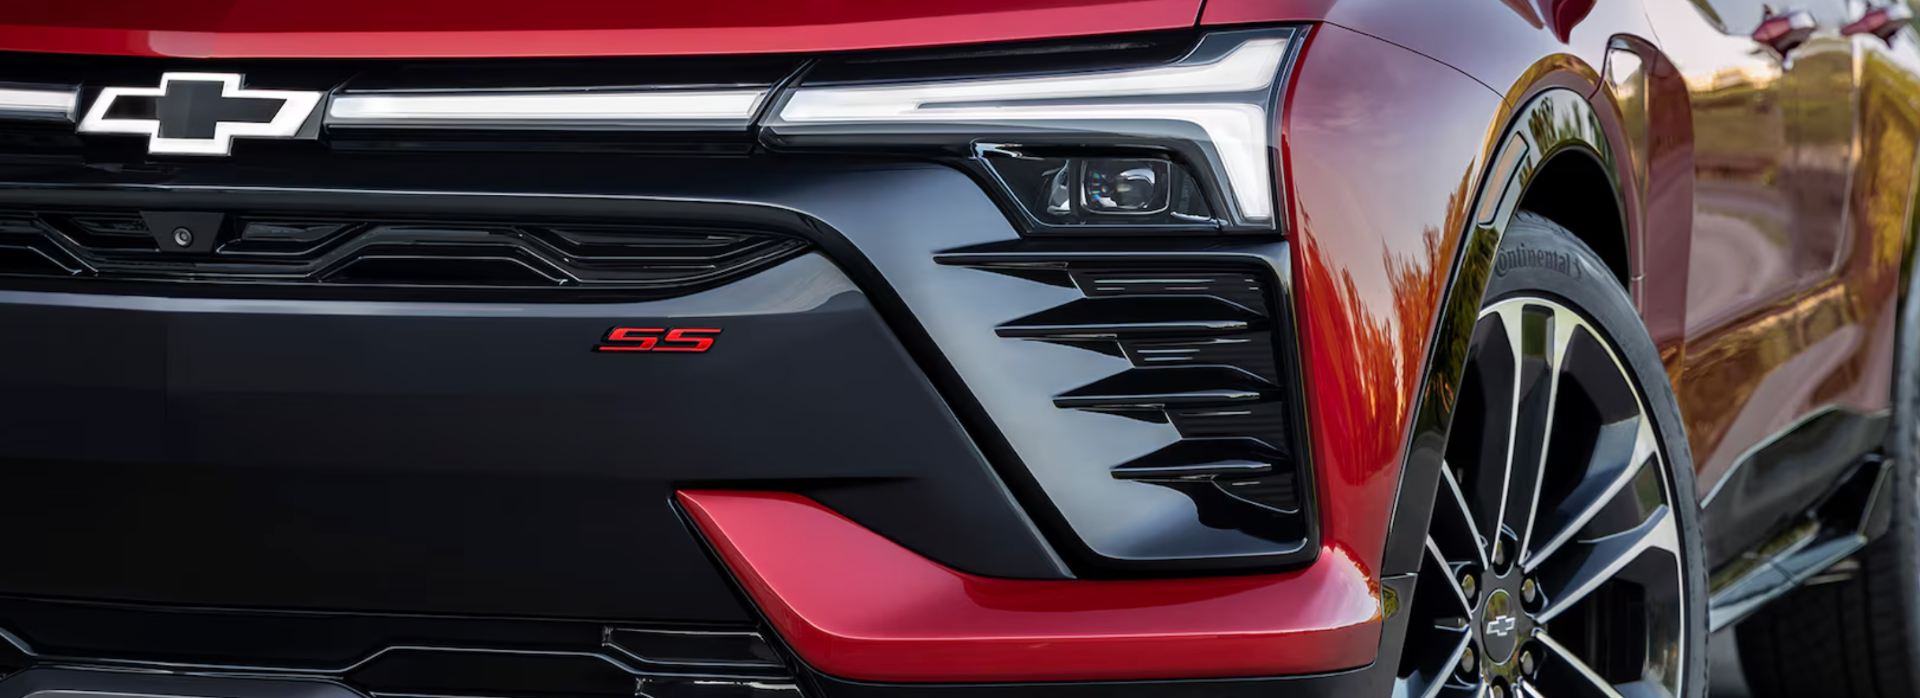 Blazer SS speed. 0 to 60 mph in less than four seconds thanks to the Wide Open Watts mode. Chevrolet Blazer SS performance.